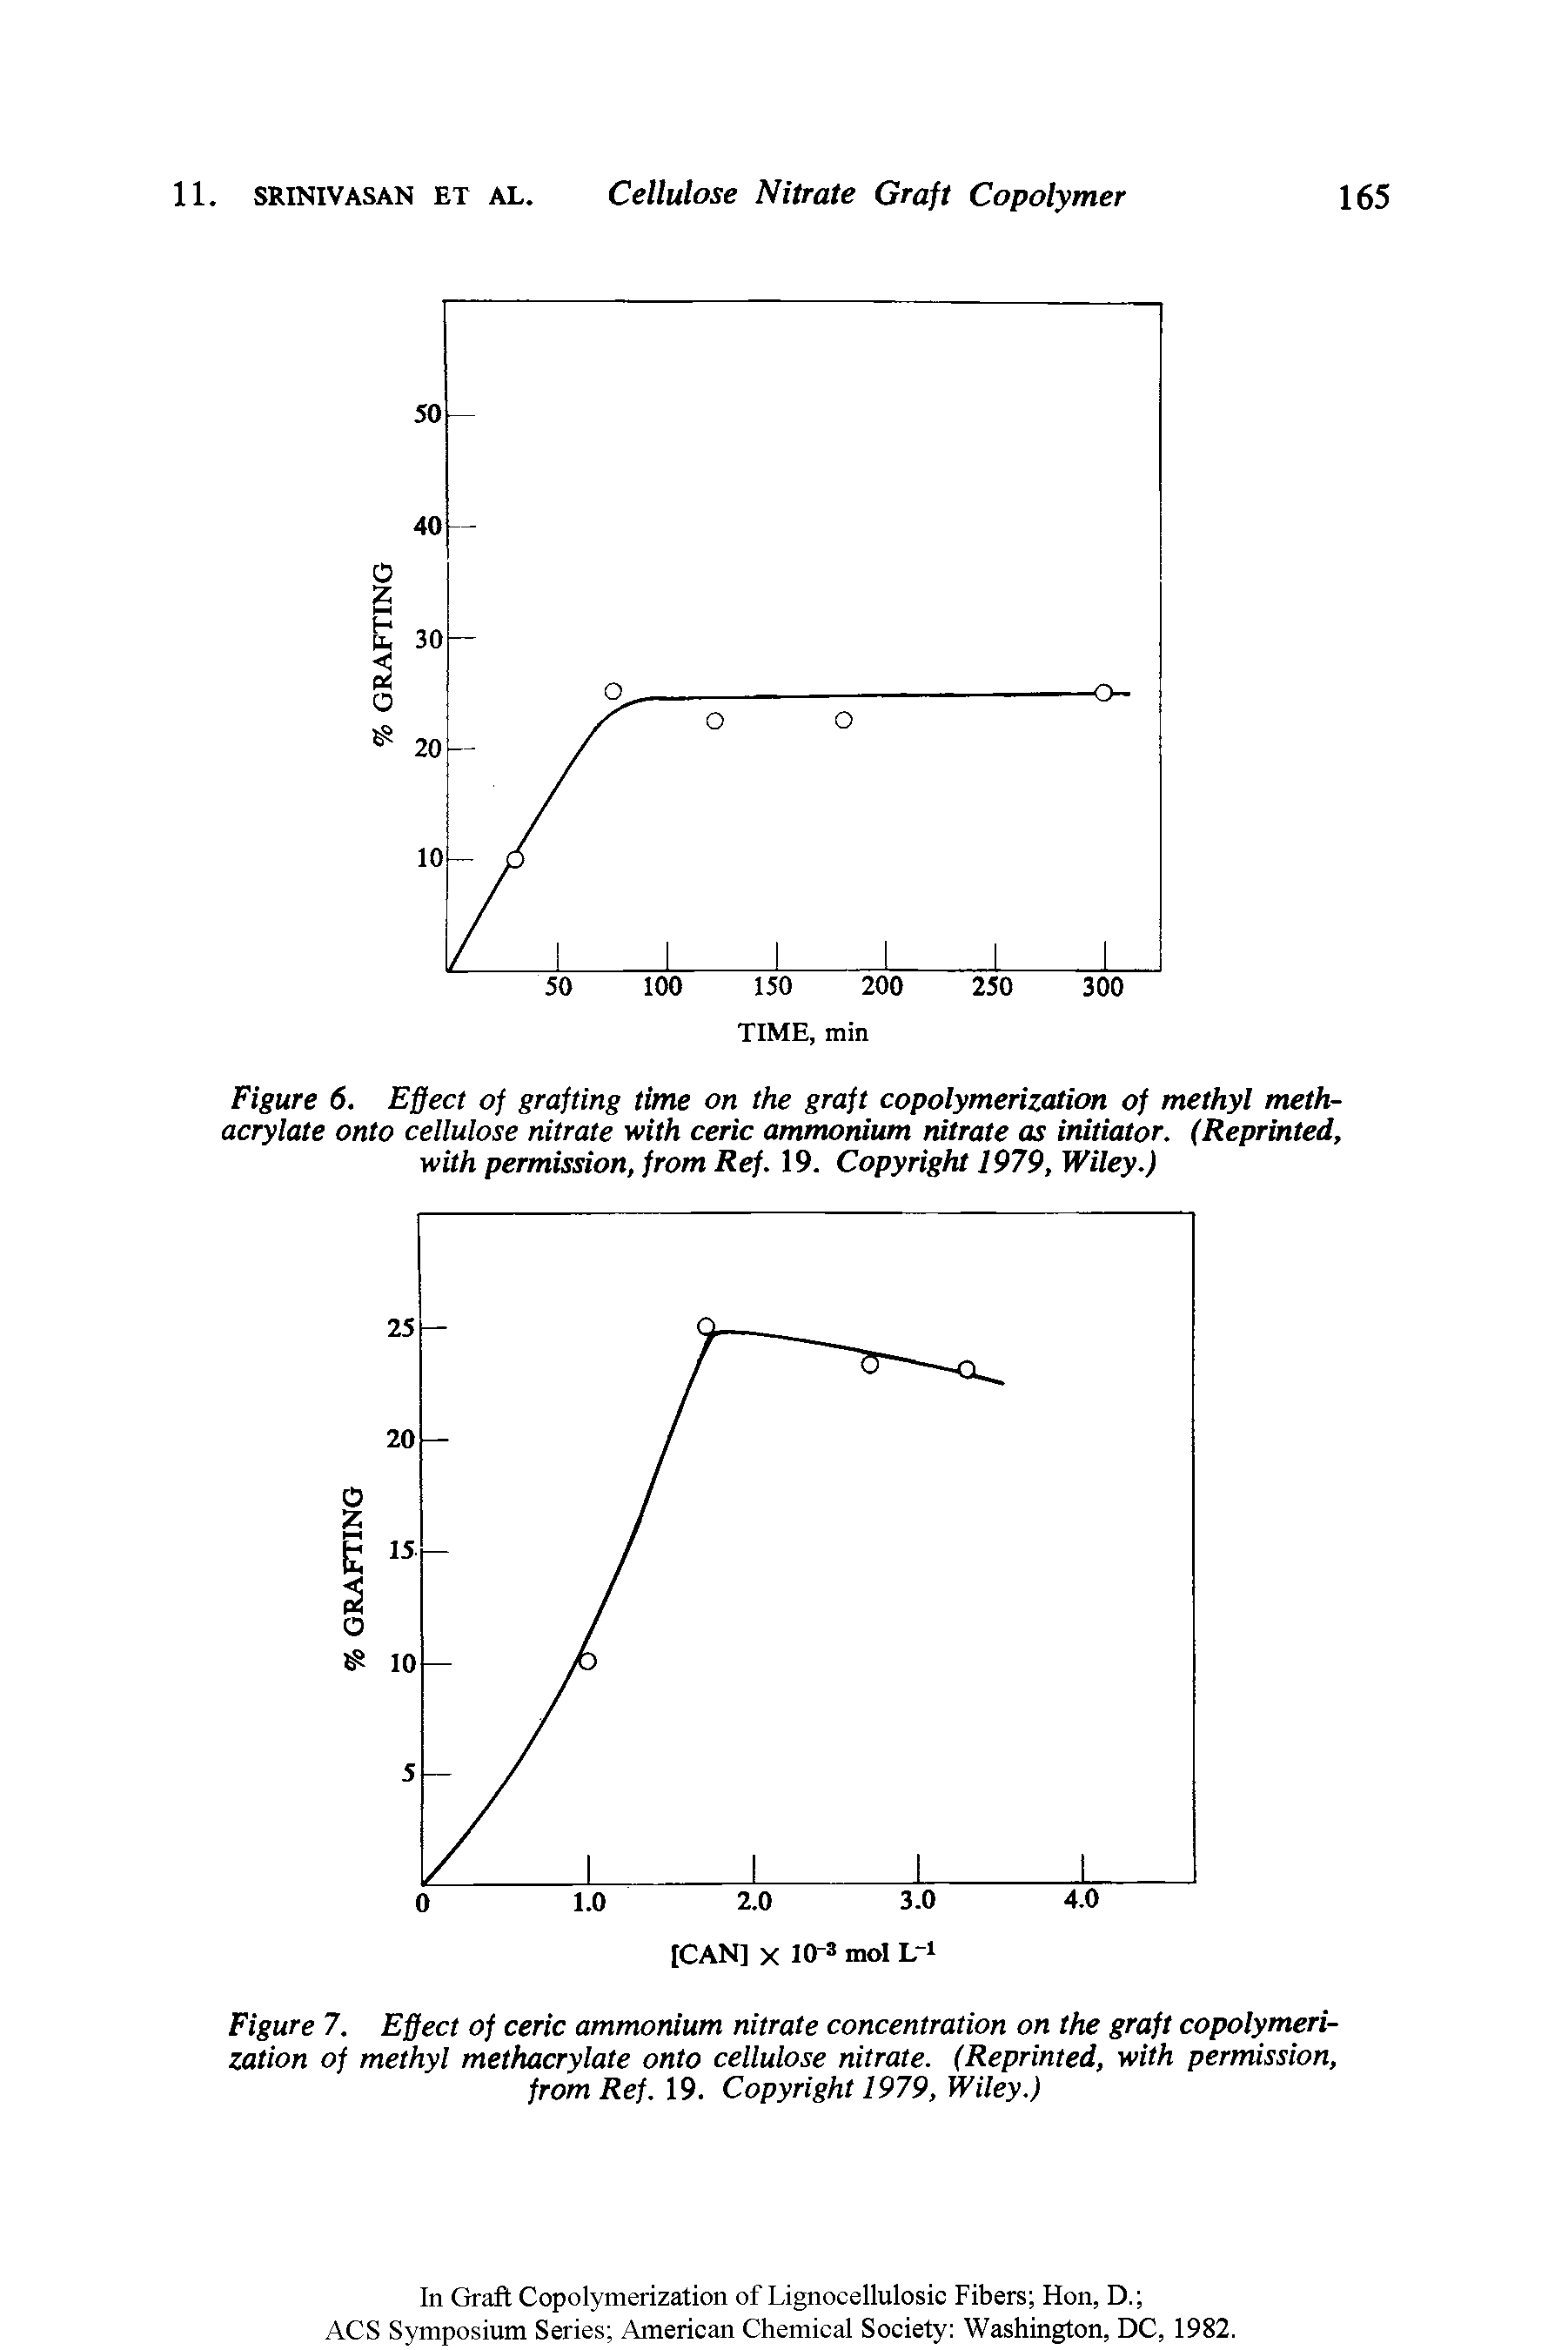 Figure 7. Effect of ceric ammonium nitrate concentration on the graft copolymerization of methyl methacrylate onto cellulose nitrate. (Reprinted, with permission, from Ref. 19. Copyright 1979, Wiley.)...